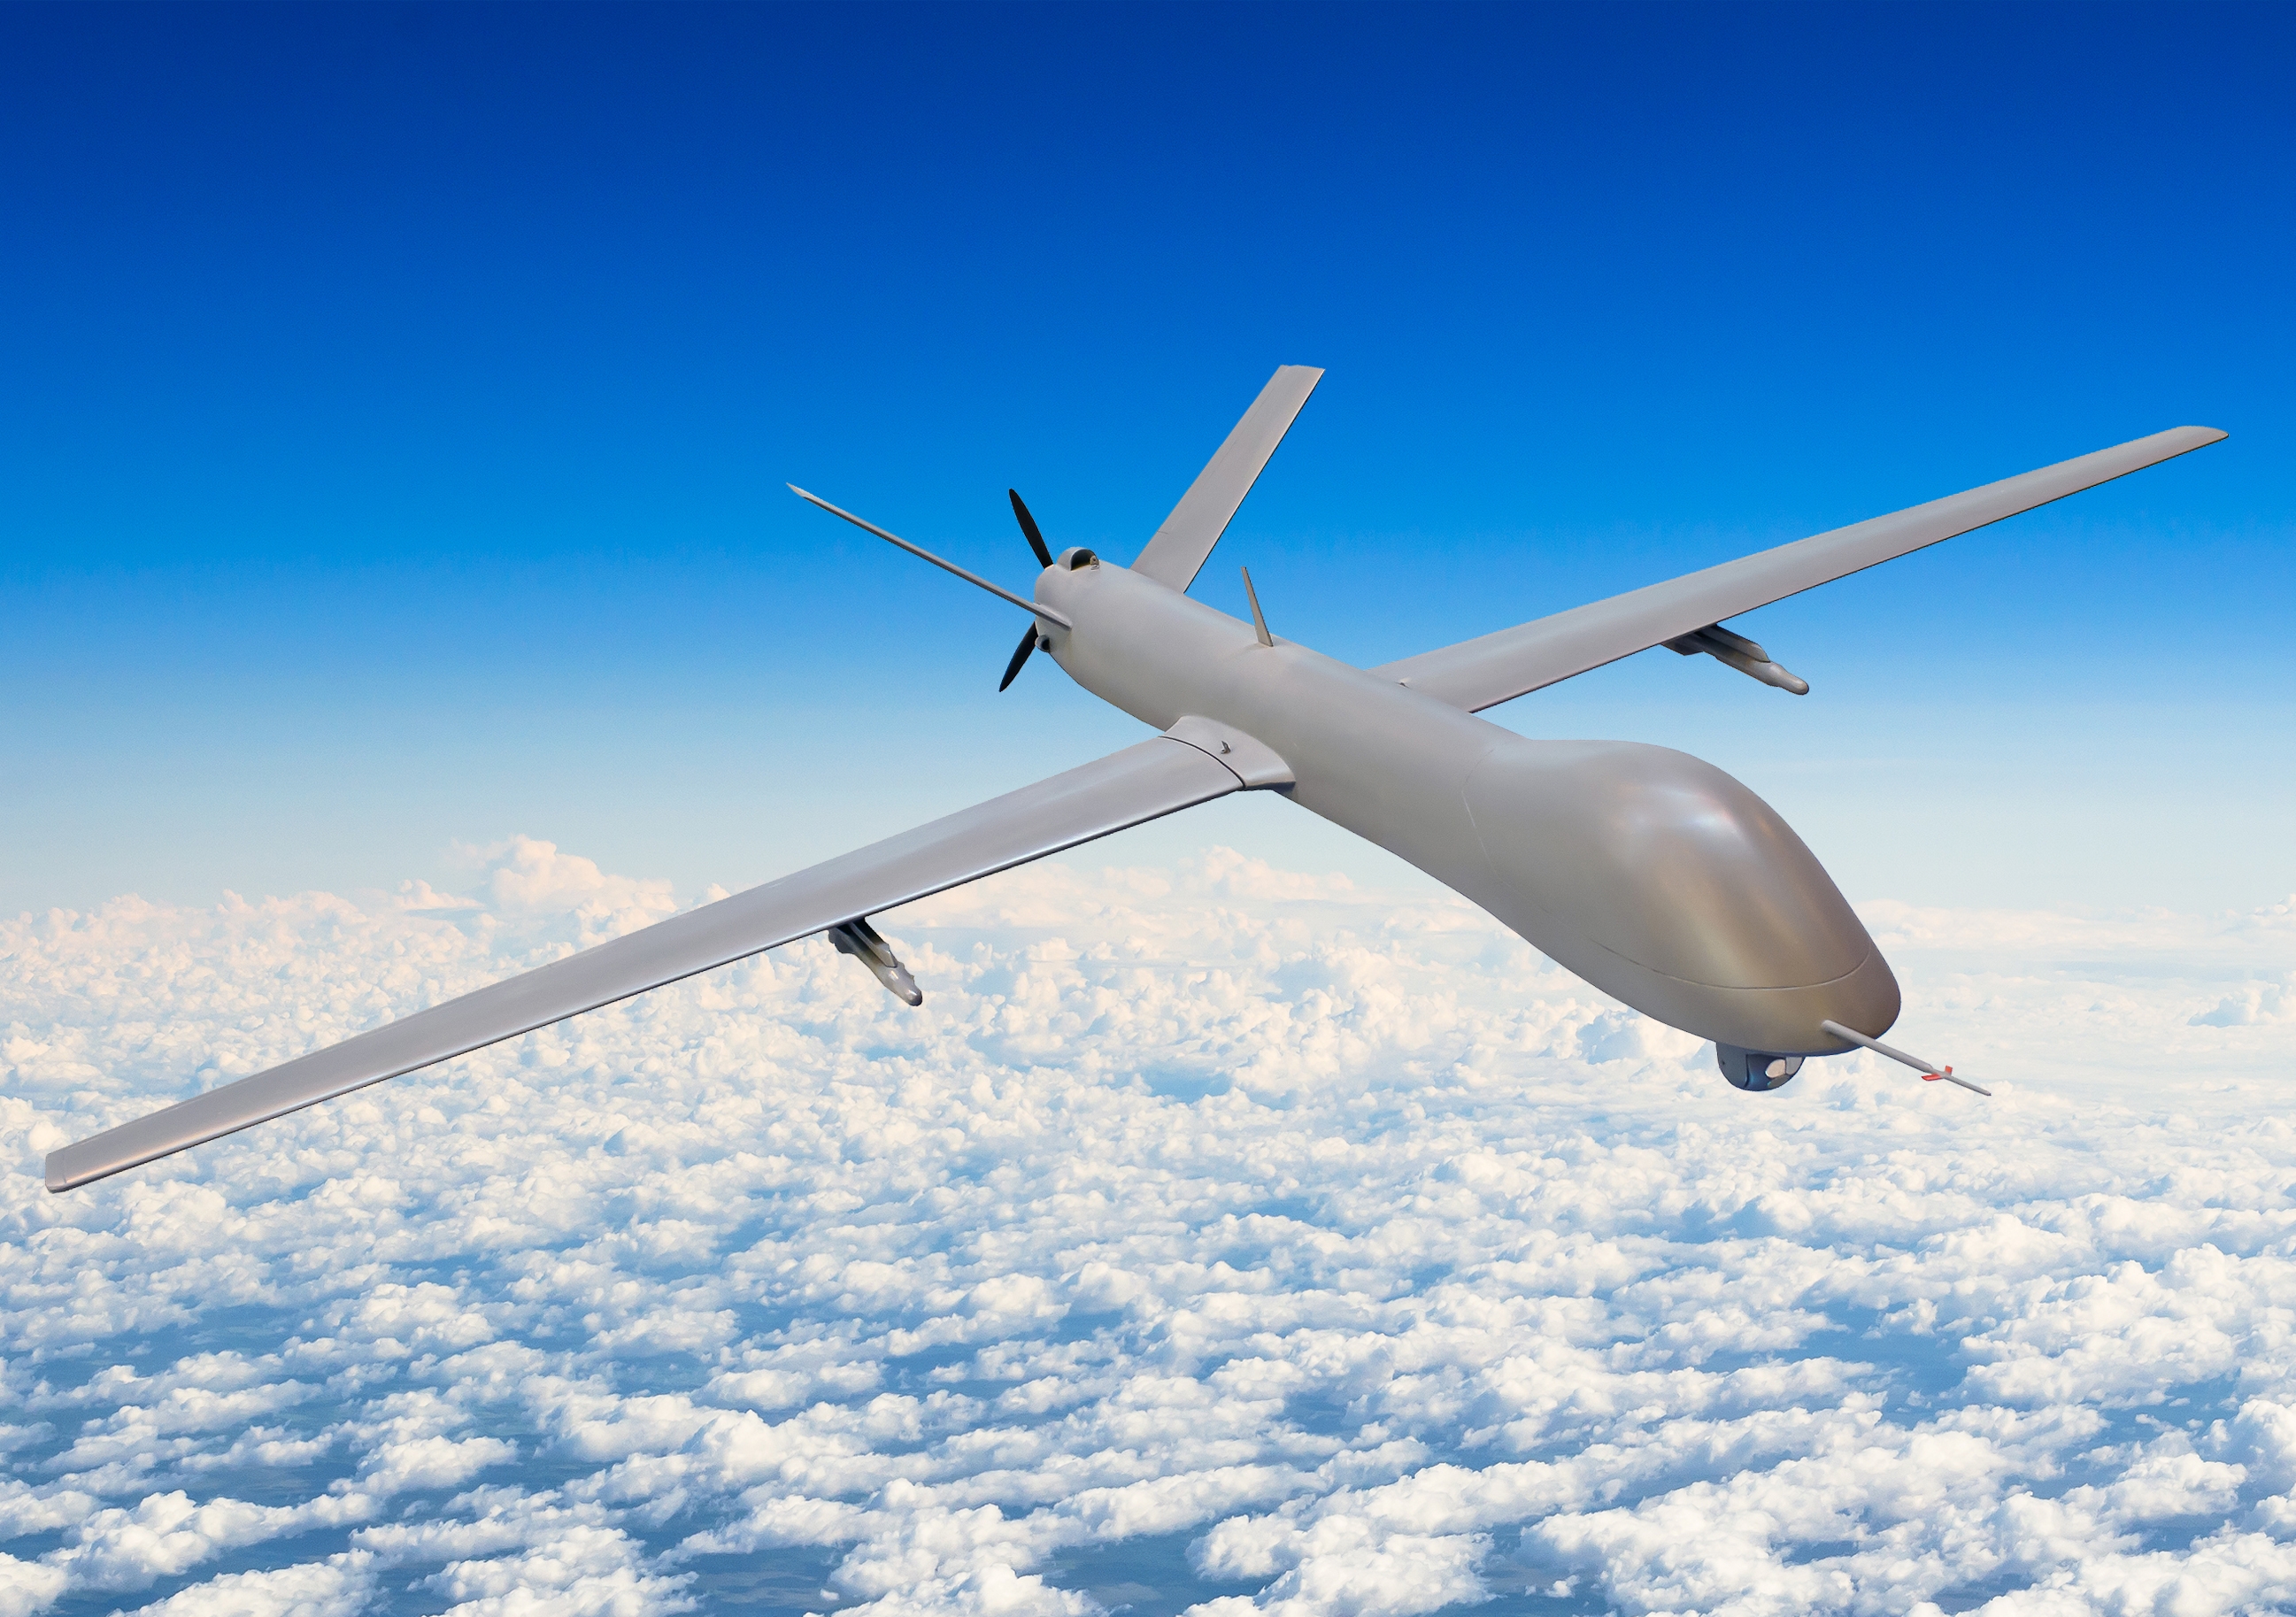 Unmanned drones, already used by many countries, are a step away from lethal autonomous weapons. Photo: Shutterstock